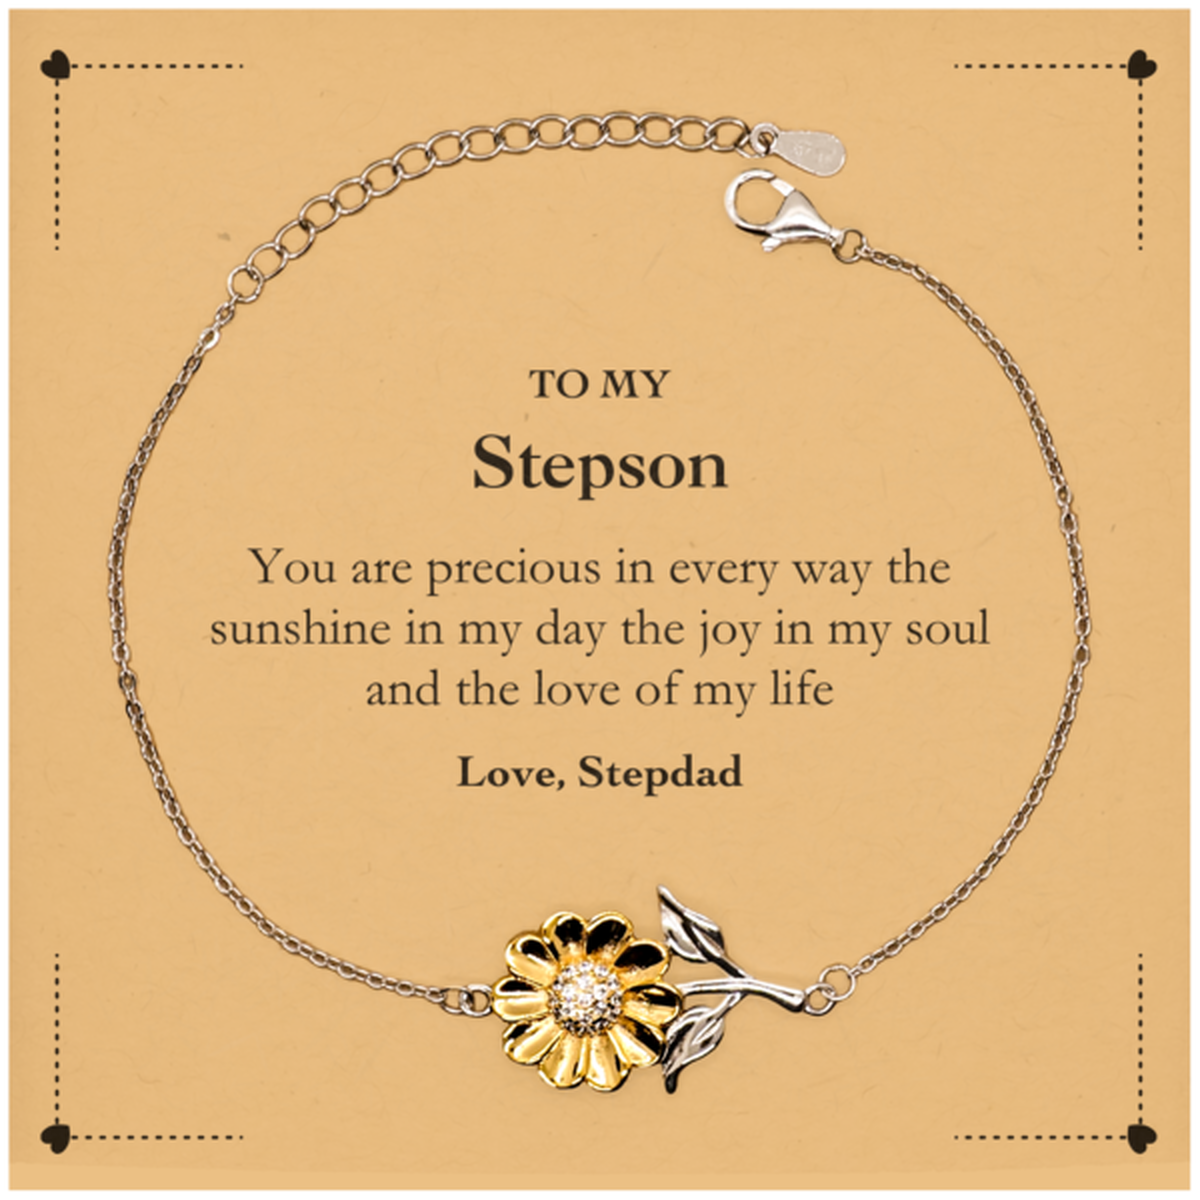 Graduation Gifts for Stepson Sunflower Bracelet Present from Stepdad, Christmas Stepson Birthday Gifts Stepson You are precious in every way the sunshine in my day. Love, Stepdad